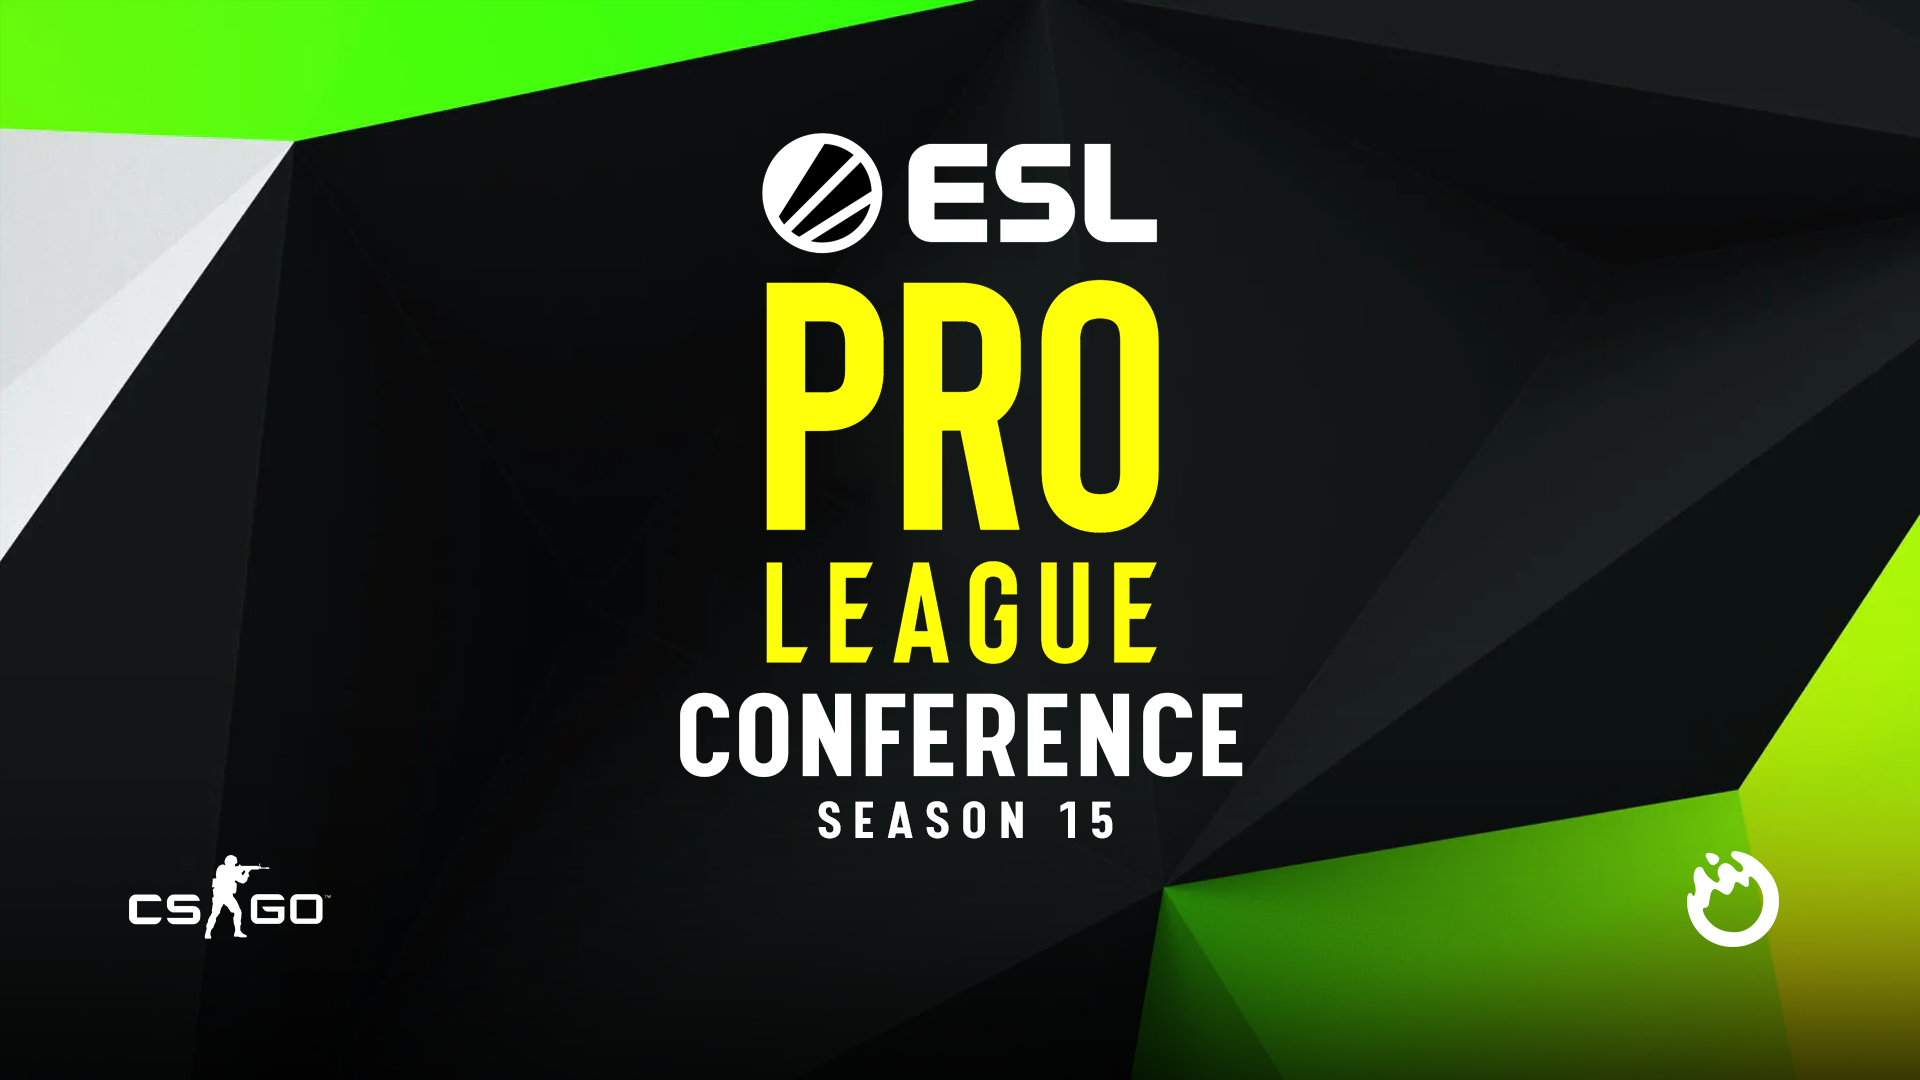 ESL Pro League S15 Conference: Both OCE qualification hopes dashed; ORDER defeat RBG but go down swinging against LDLC